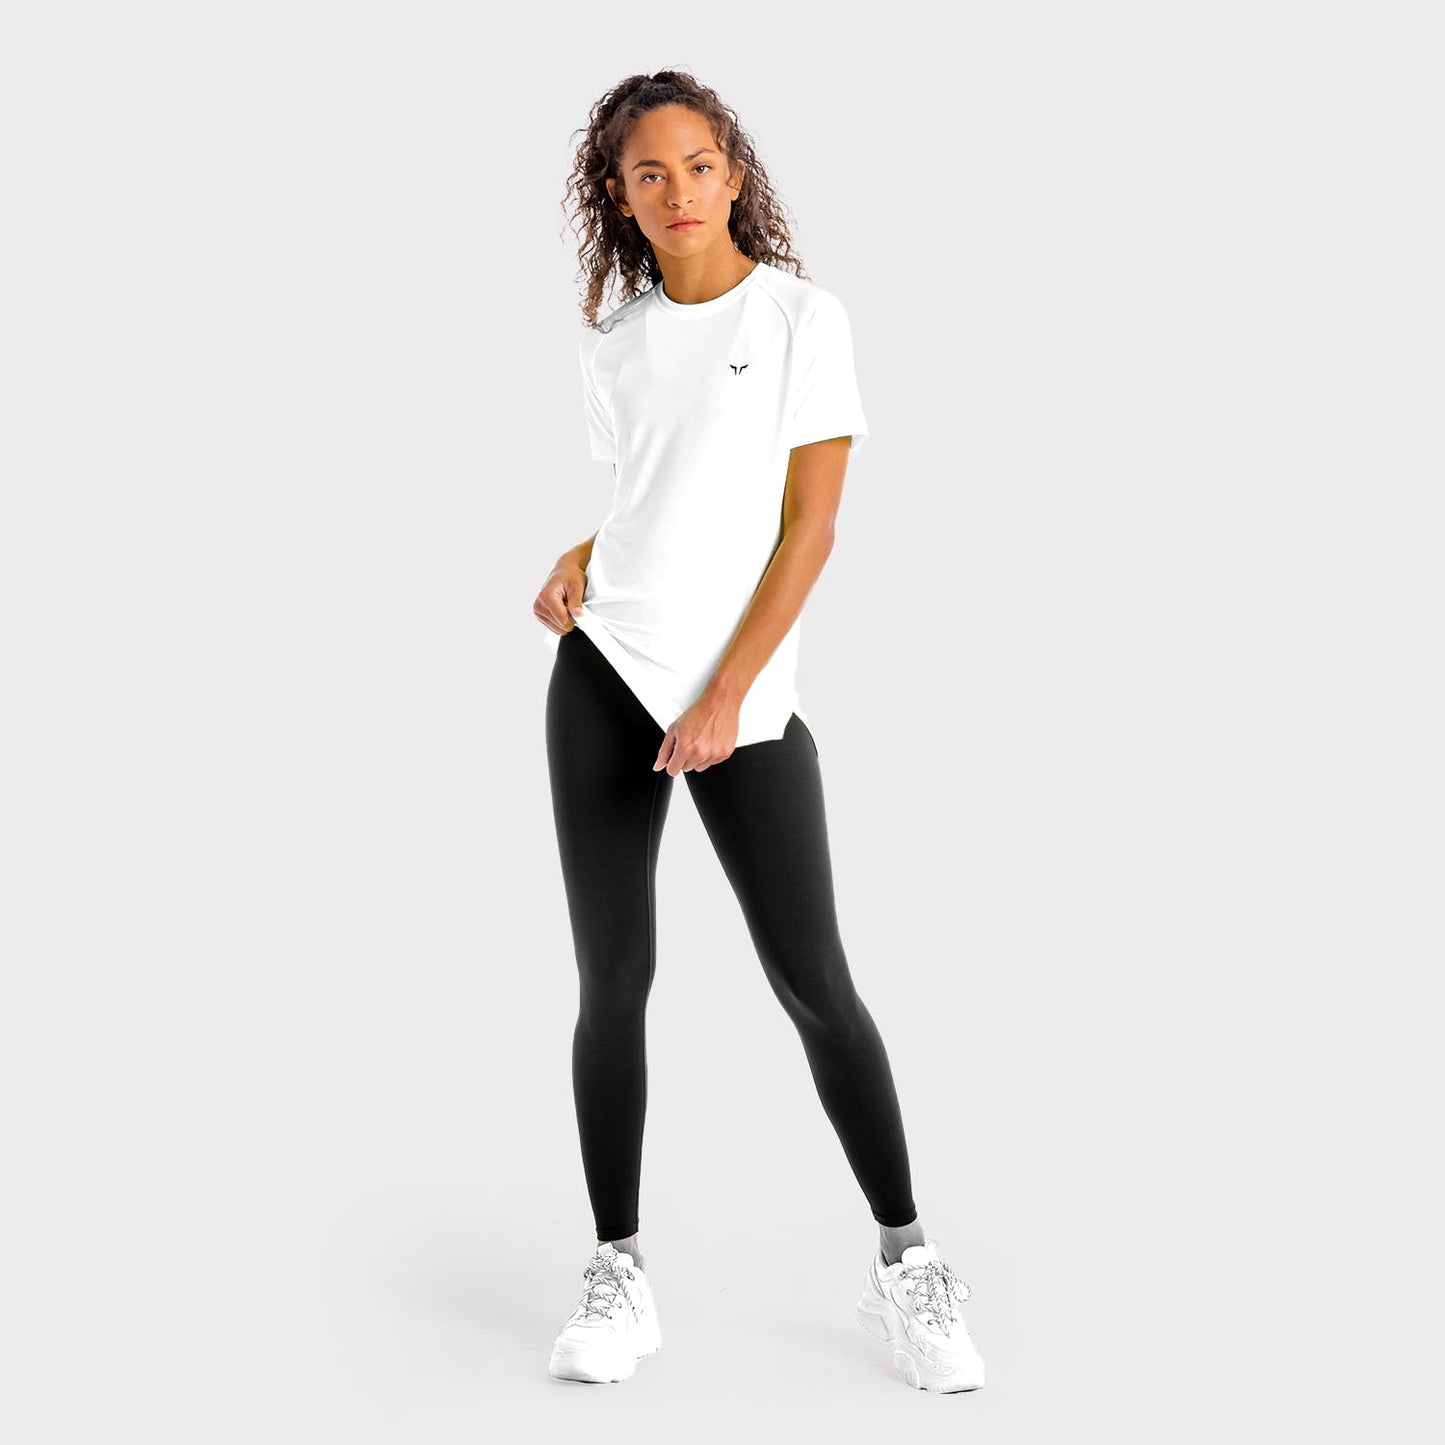 squatwolf-workout-clothes-core-mesh-tee-white-women-gym-t-shirts-for-women